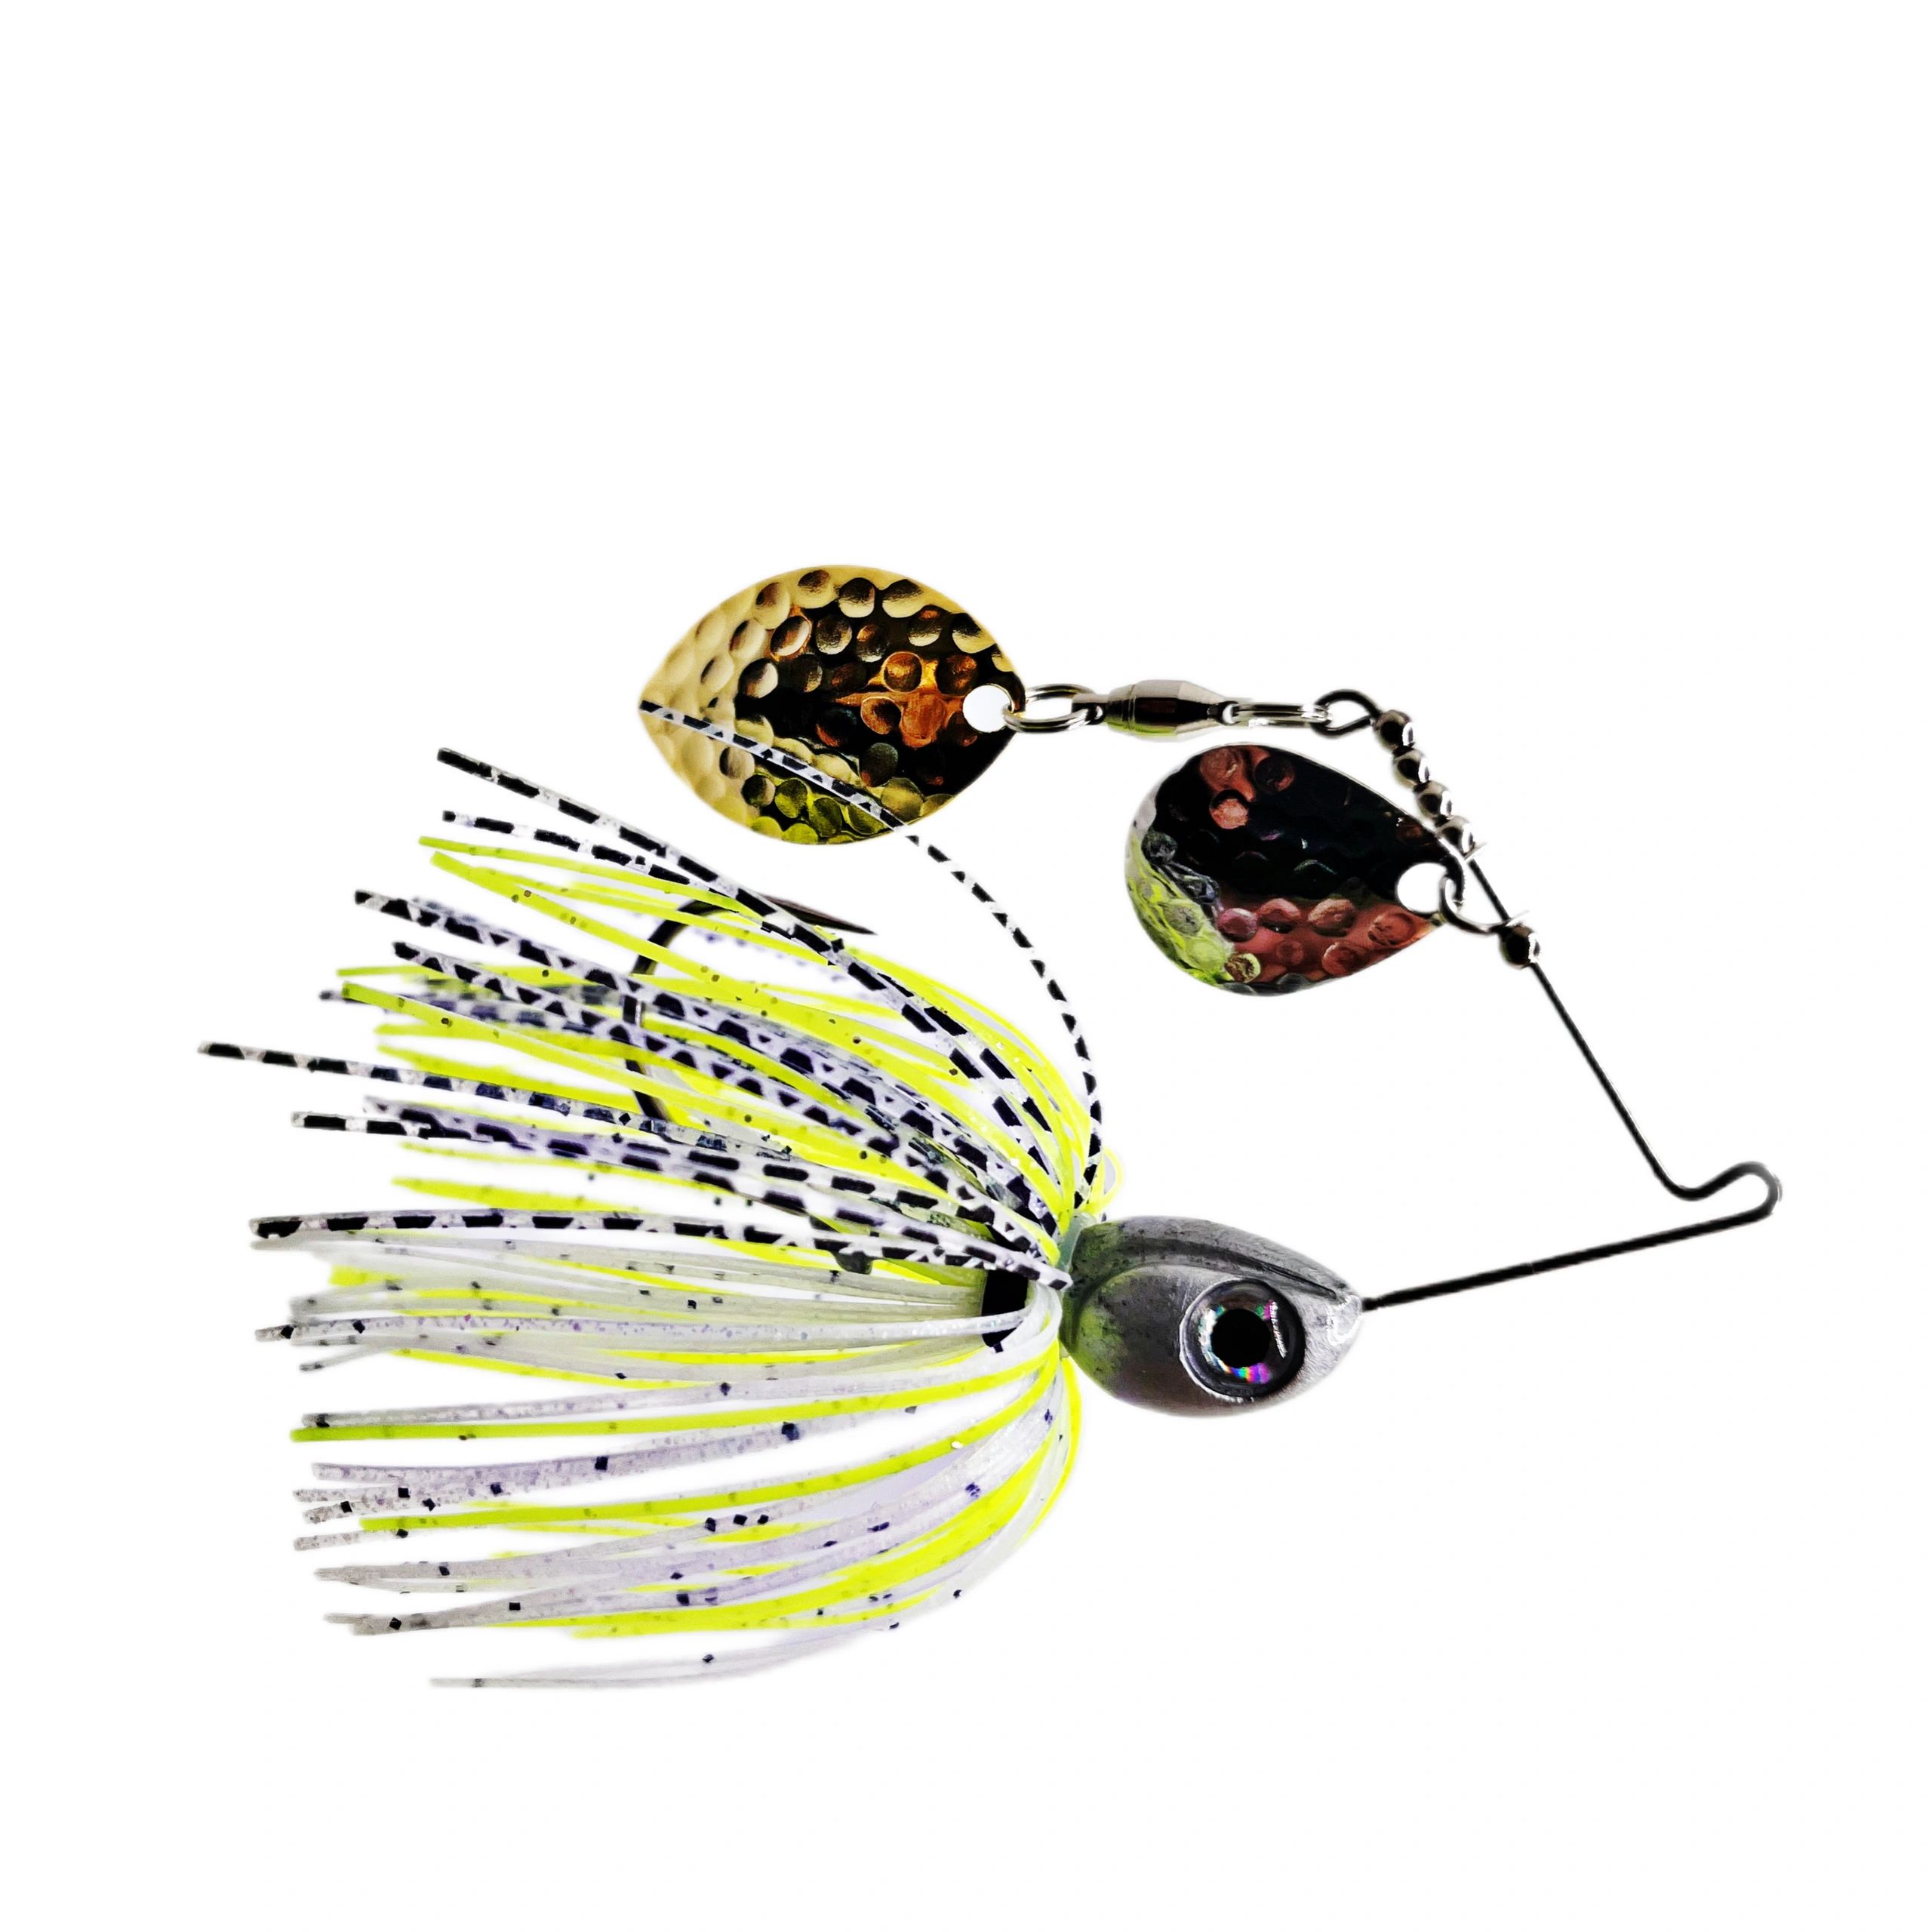 Bass Fishing Lures - Accent Fishing Products